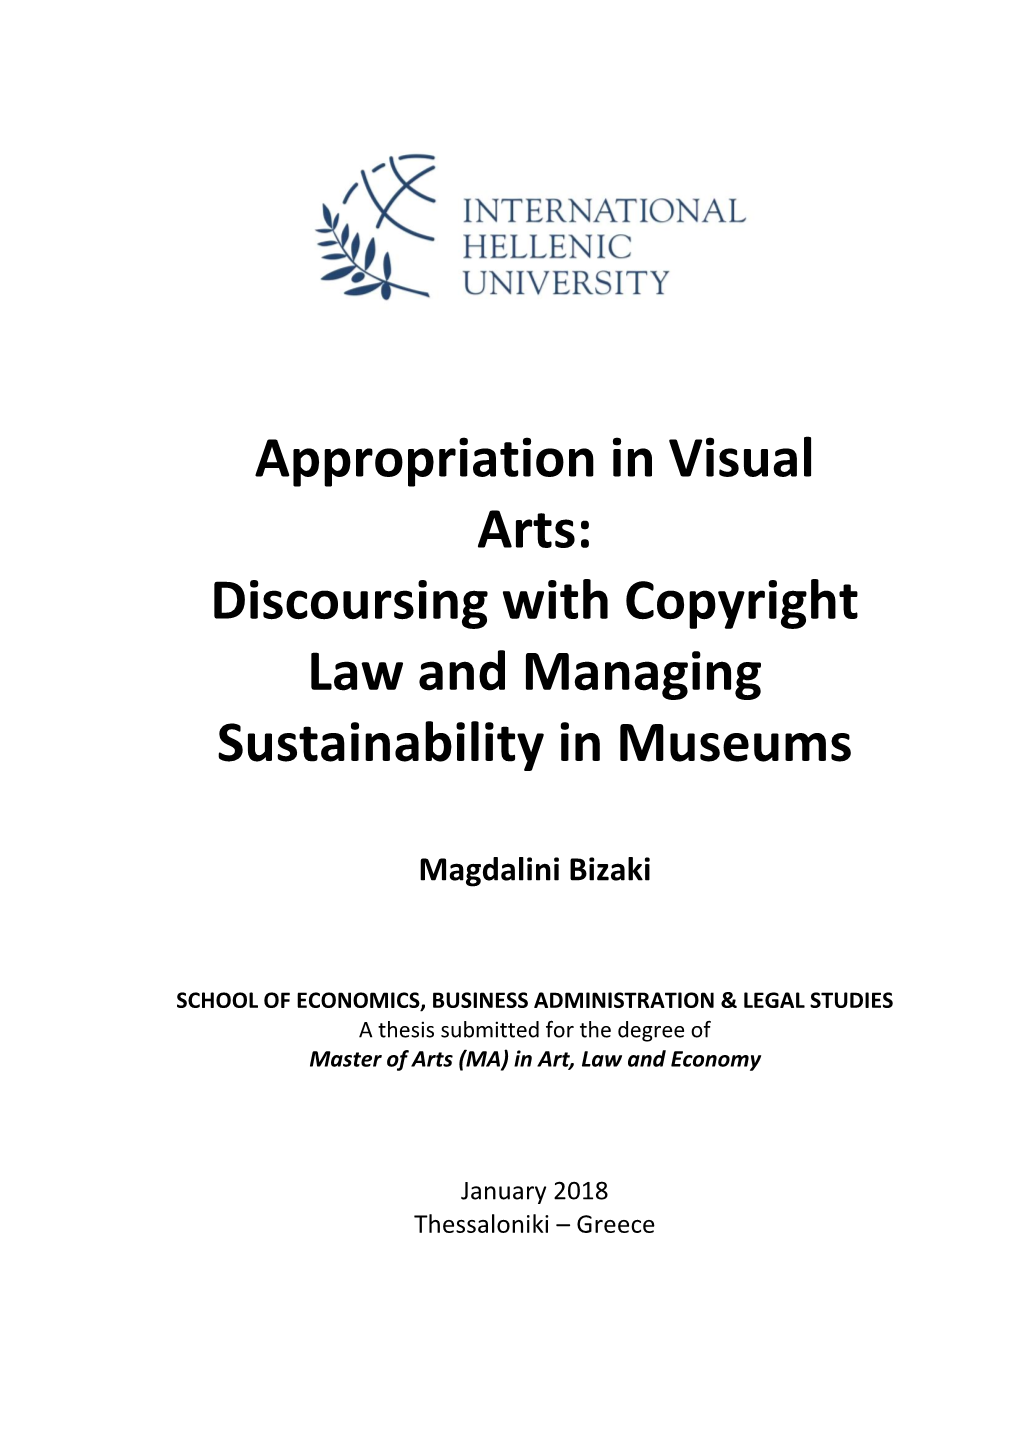 Appropriation in Visual Arts: Discoursing with Copyright Law and Managing Sustainability in Museums